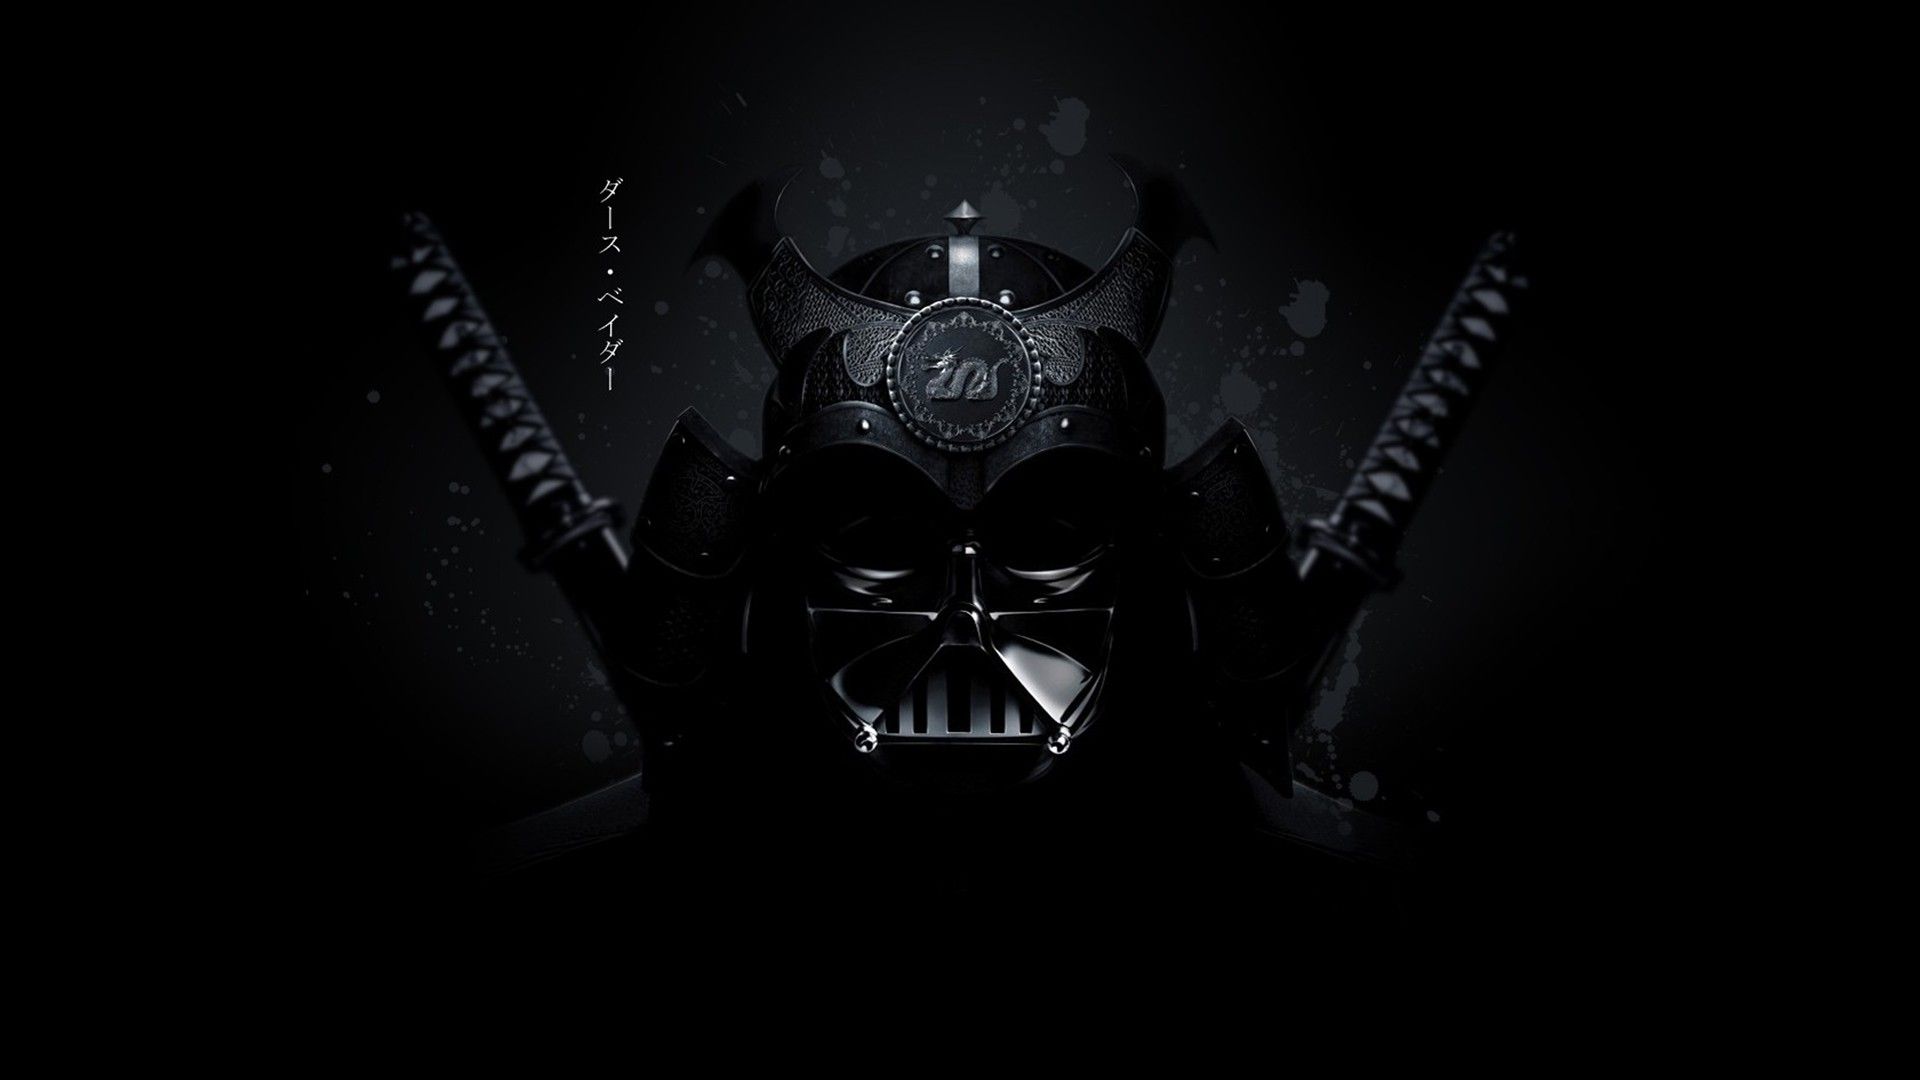 Largest Collection of Star Wars Wallpapers For Free Download